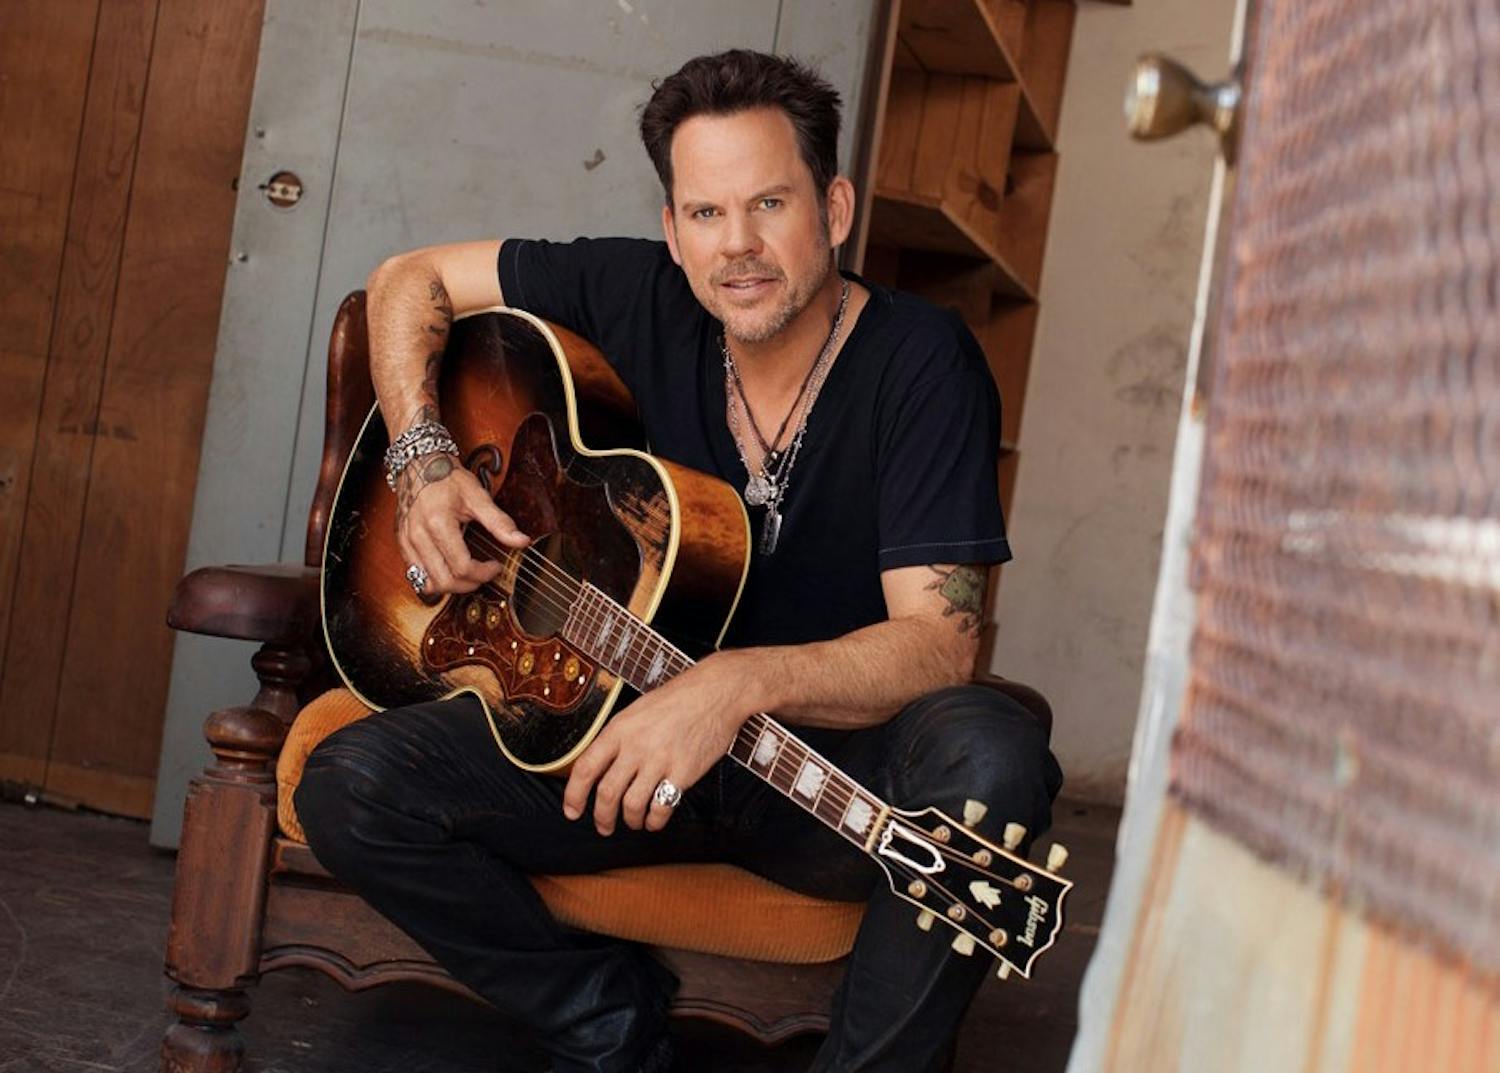 Country music artist Gary Allan will perform Nov. 3 at the IU Auditorium. Allan released his ninth album, "Set You Free," in 2013.&nbsp;